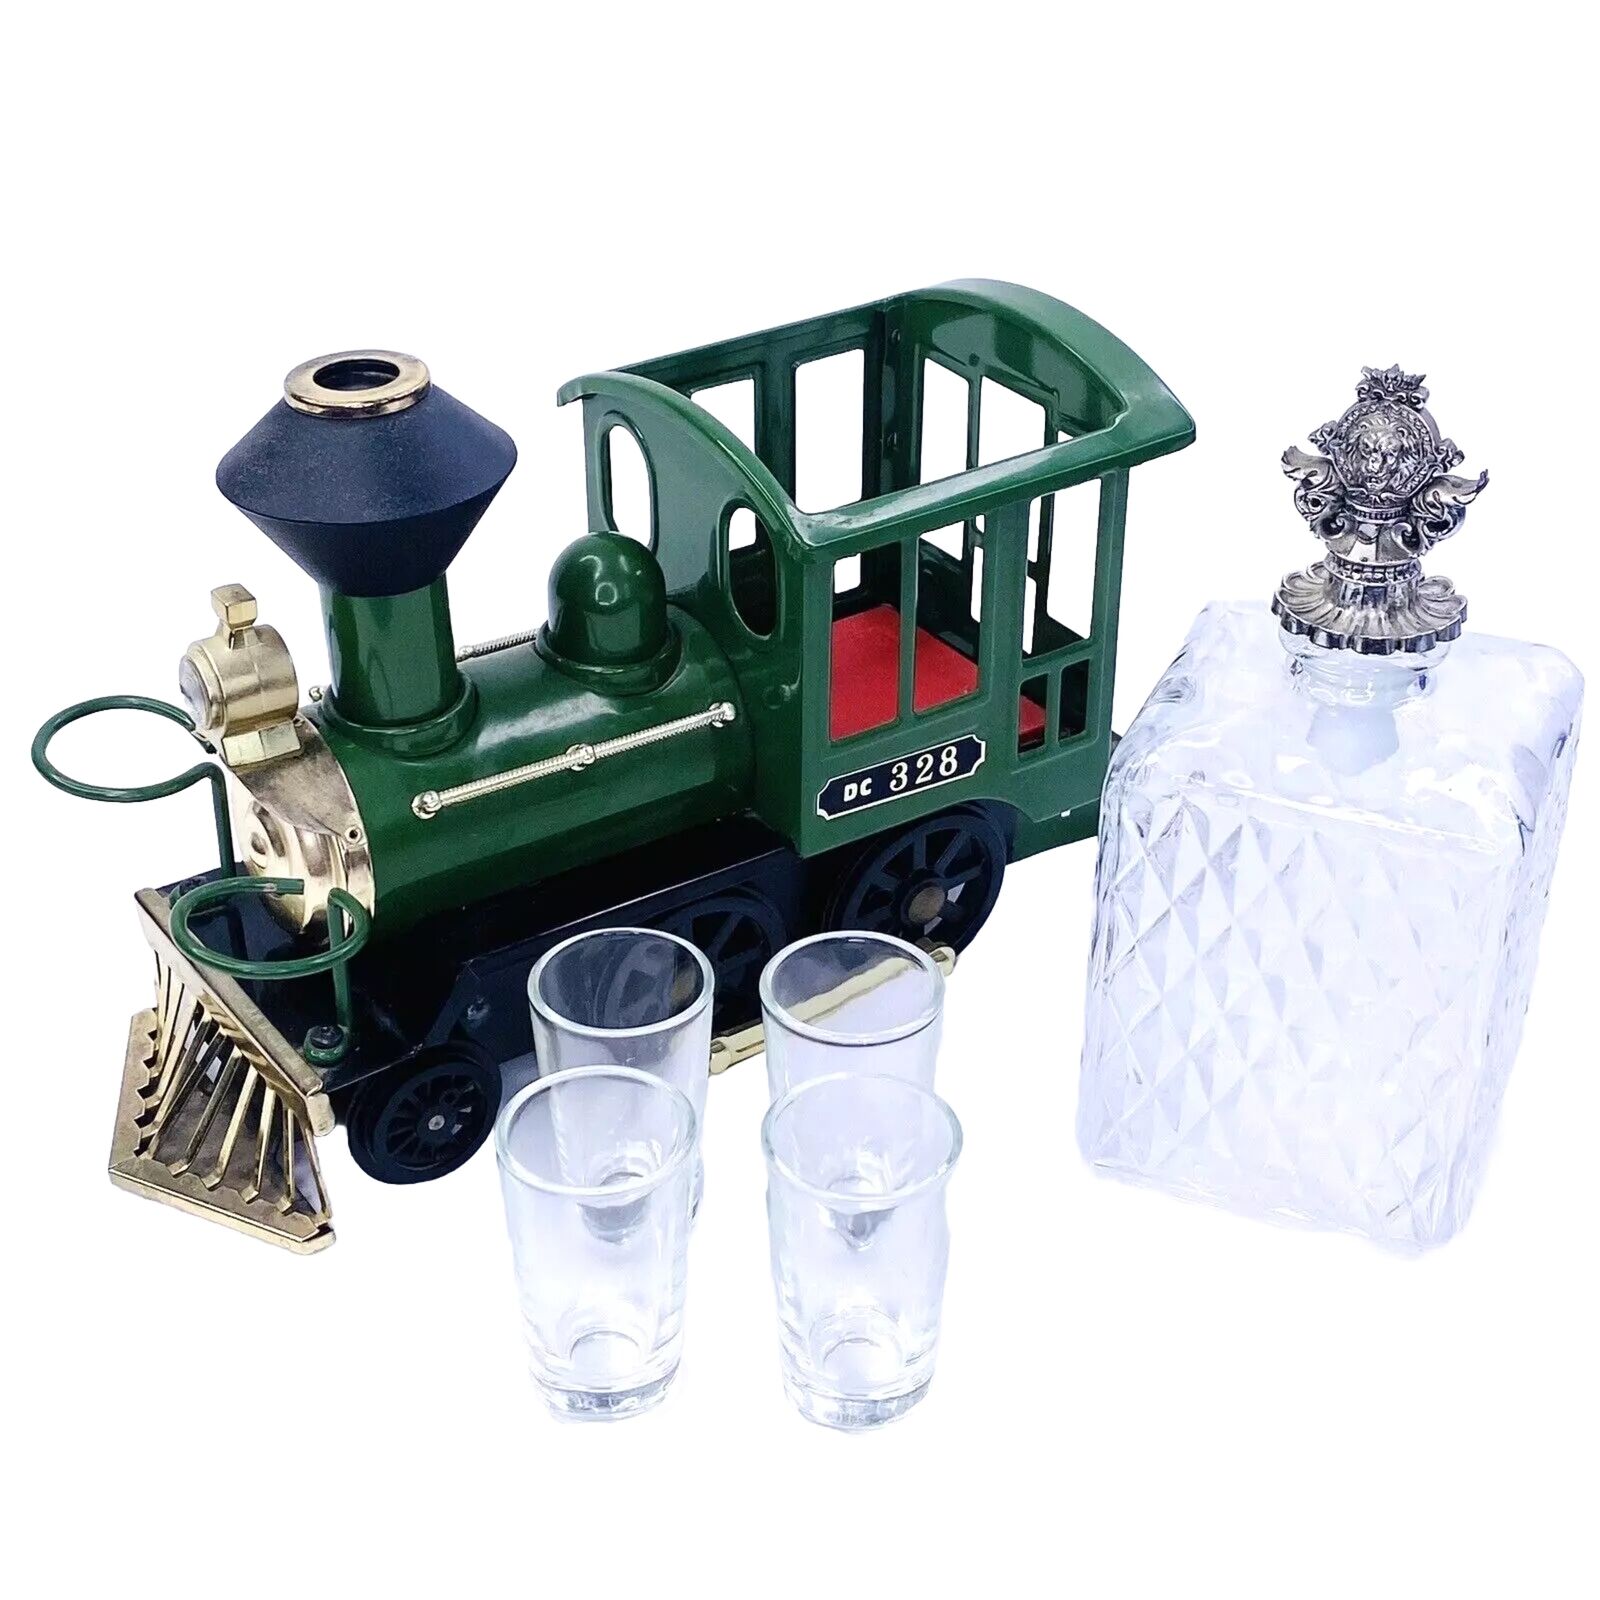 Vintage DC328 Green Train Locomotive Music Box Decanter With 4 Glasses